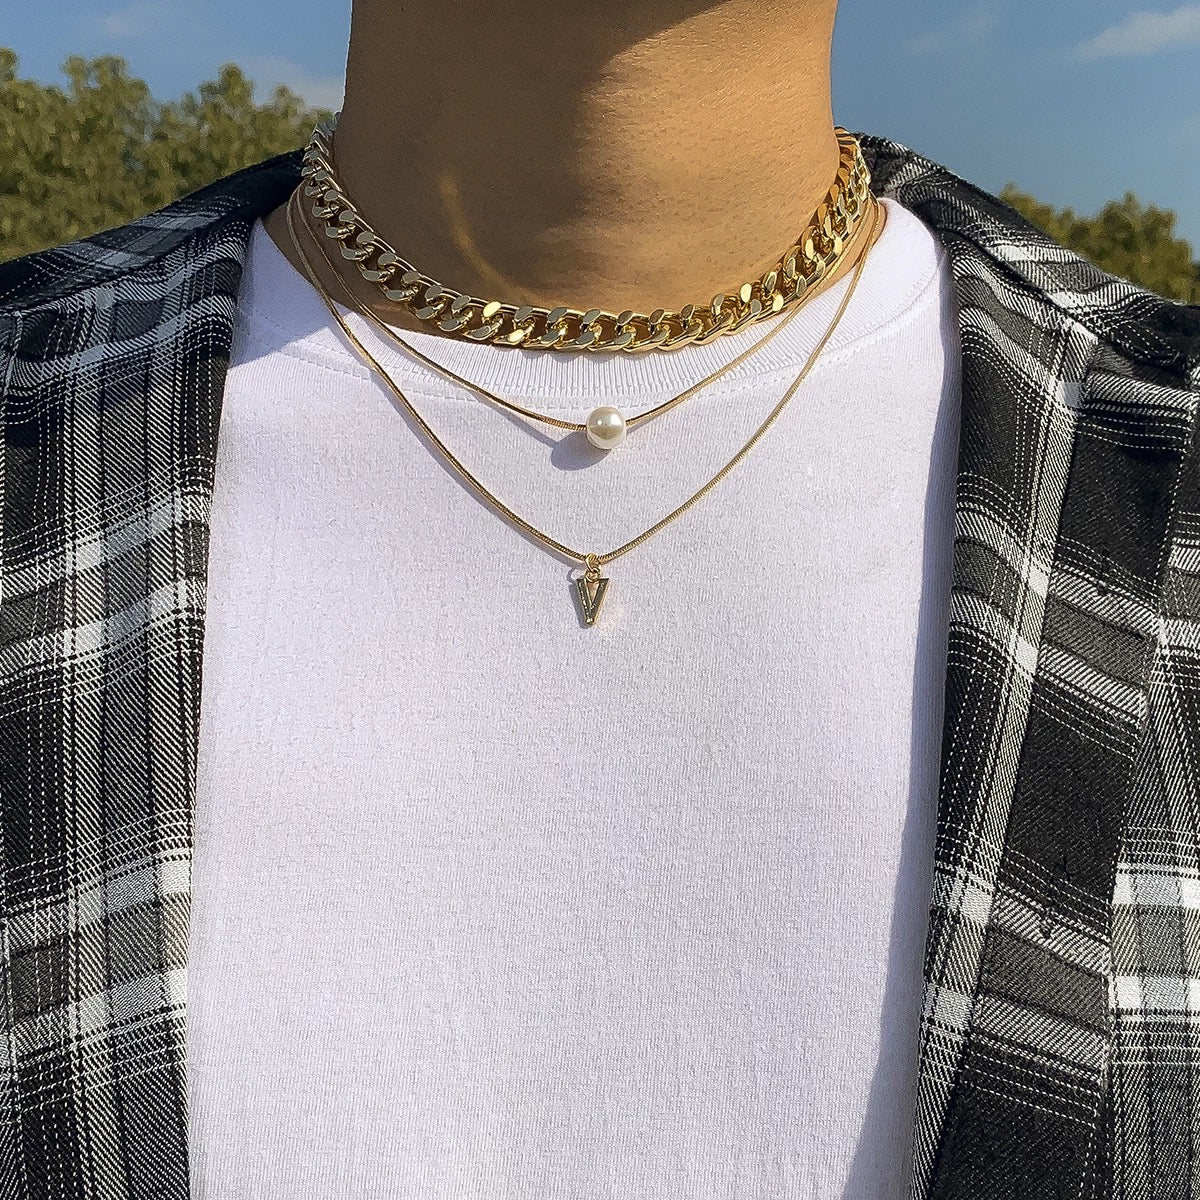 NEOR NECKLACE - THEMASTER